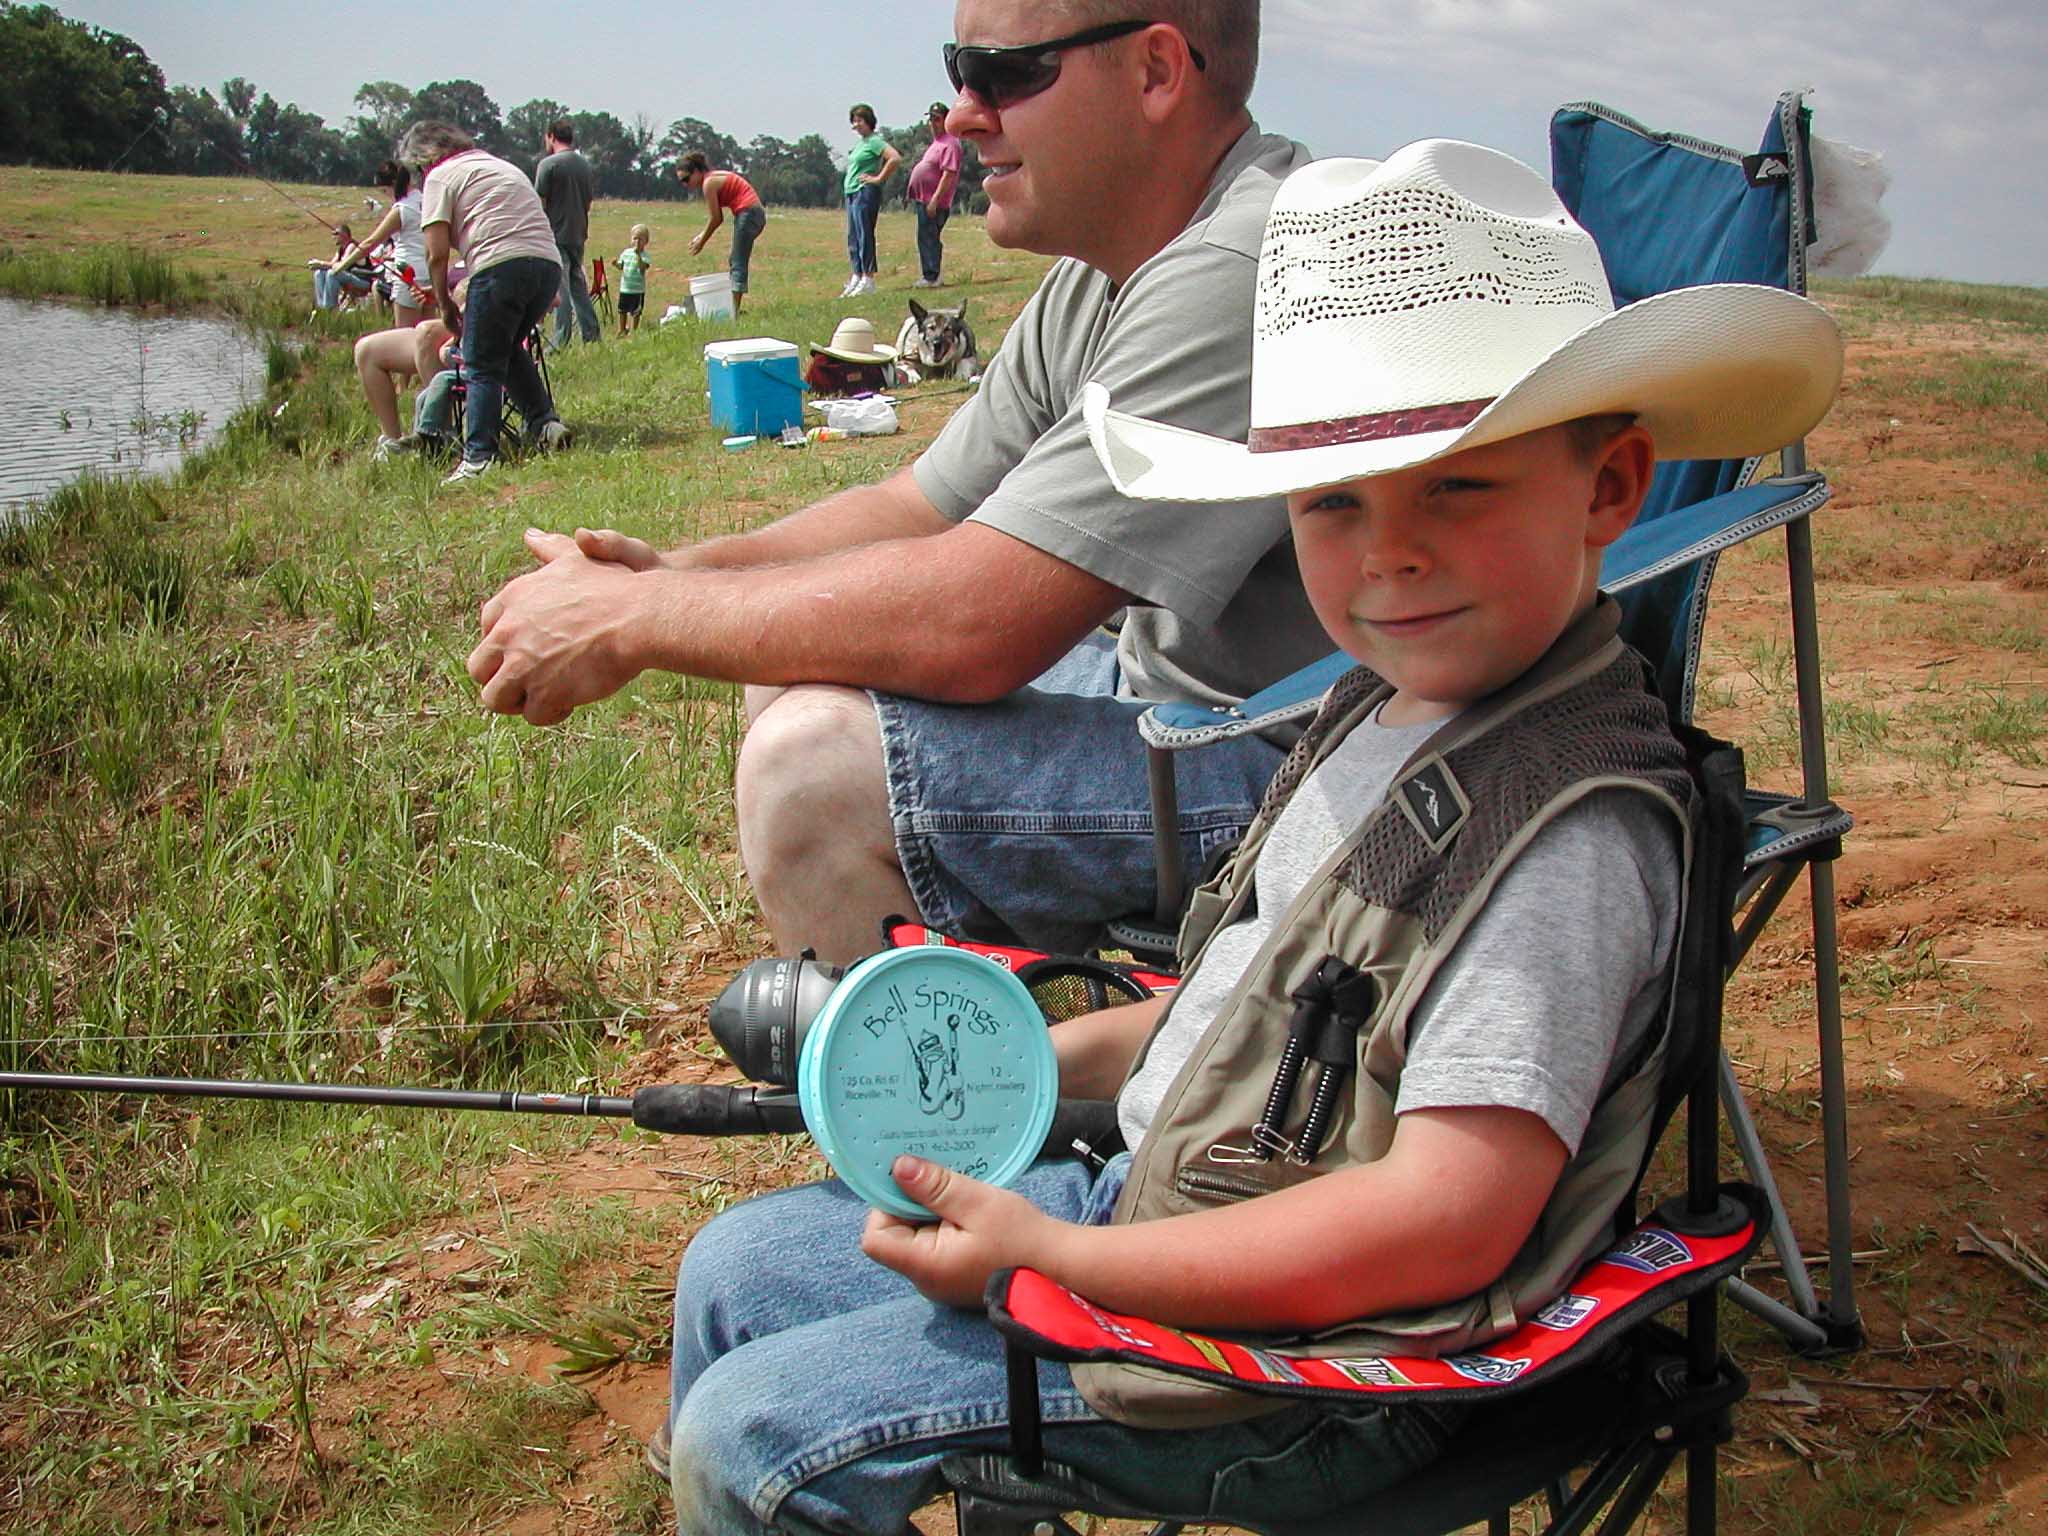 Saturday is Free Fishing Day in Tennessee WDEF